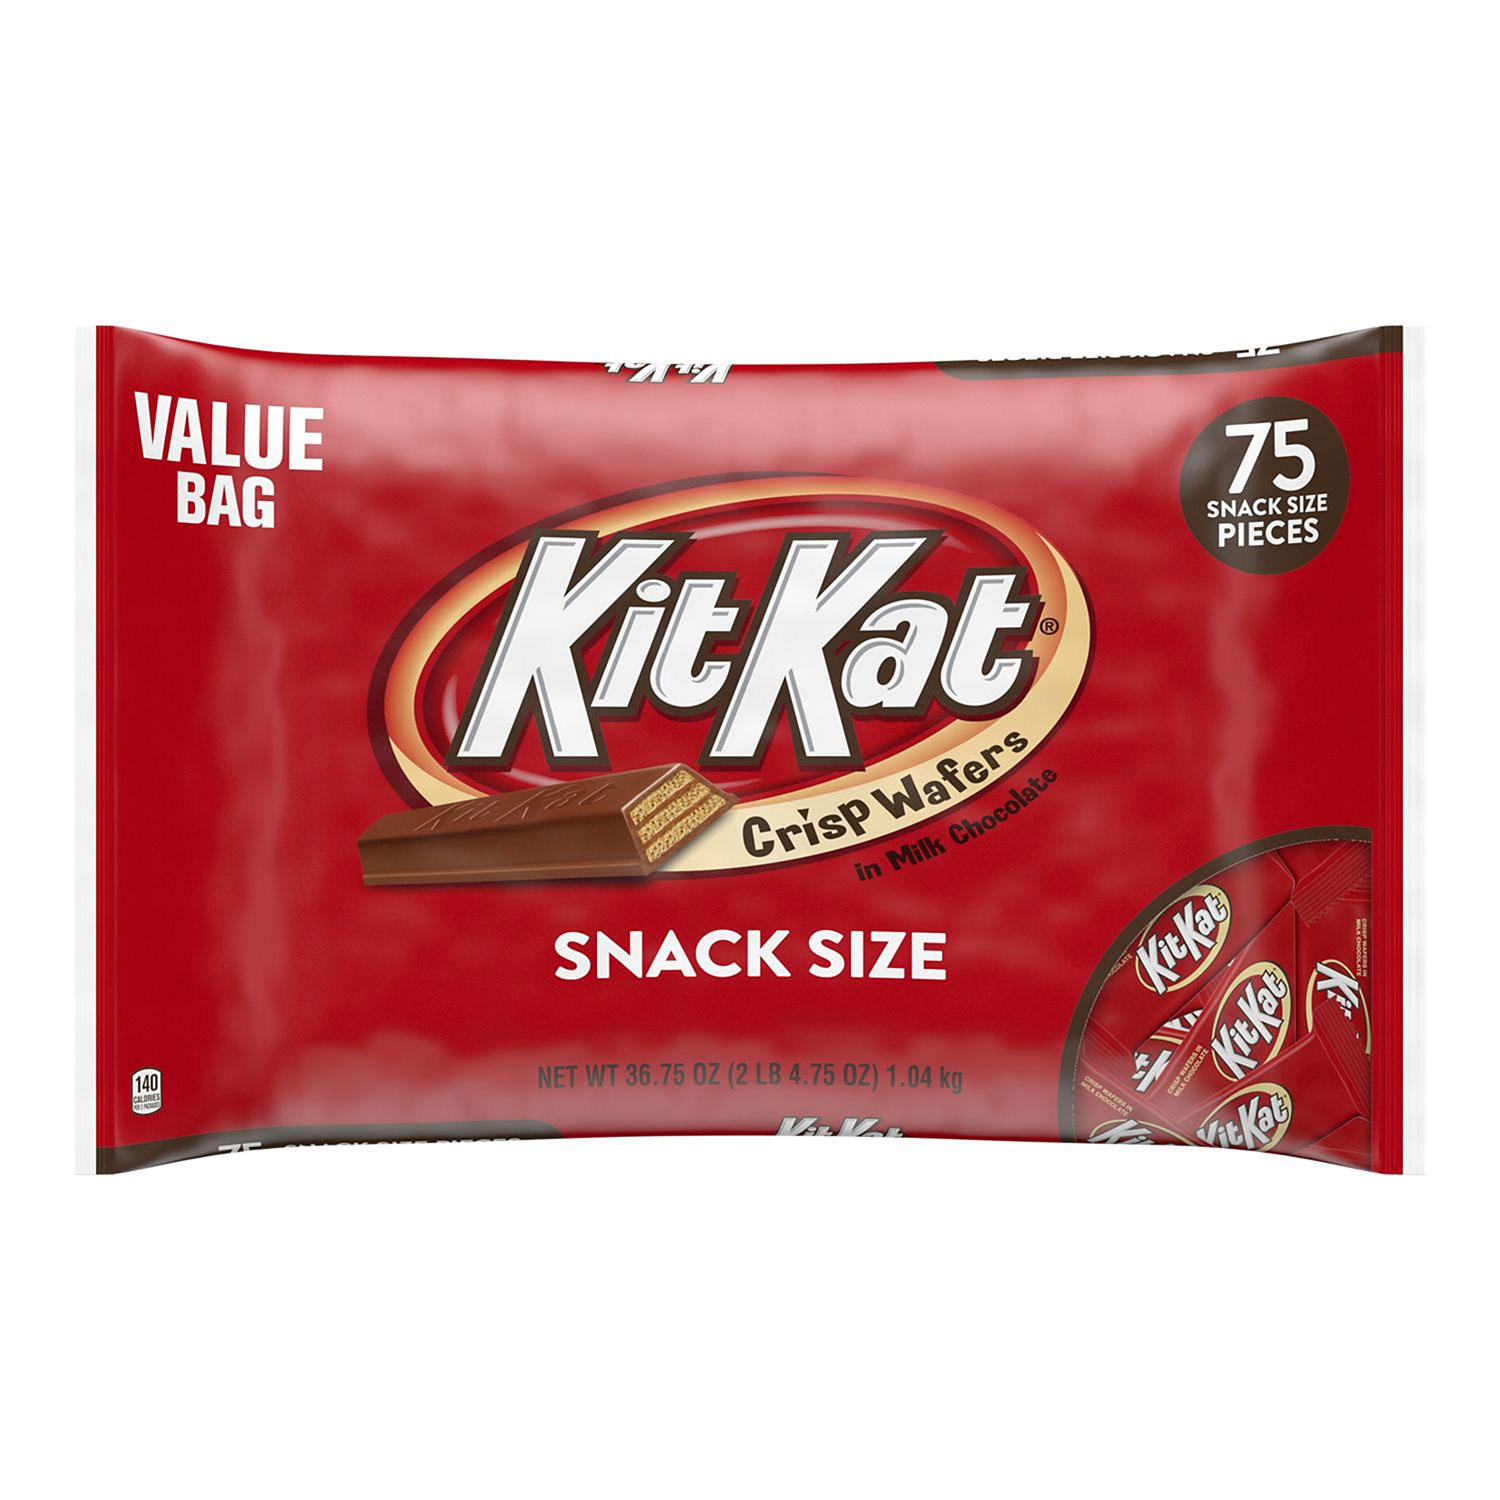 Snack size candy at Sam’s Club $7.98